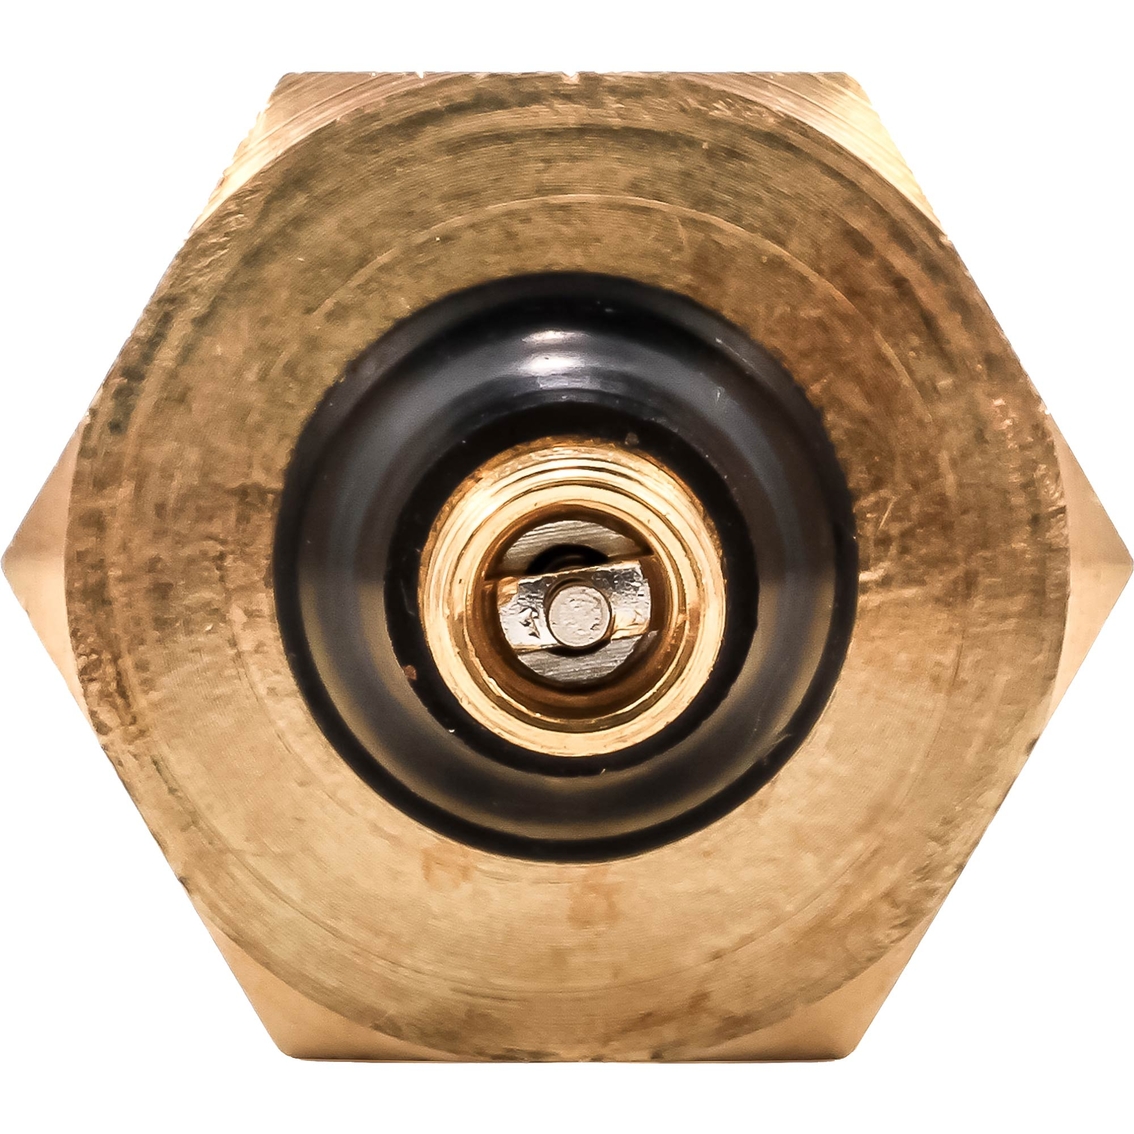 Camco RV Brass Blow Out Plug - Image 6 of 6